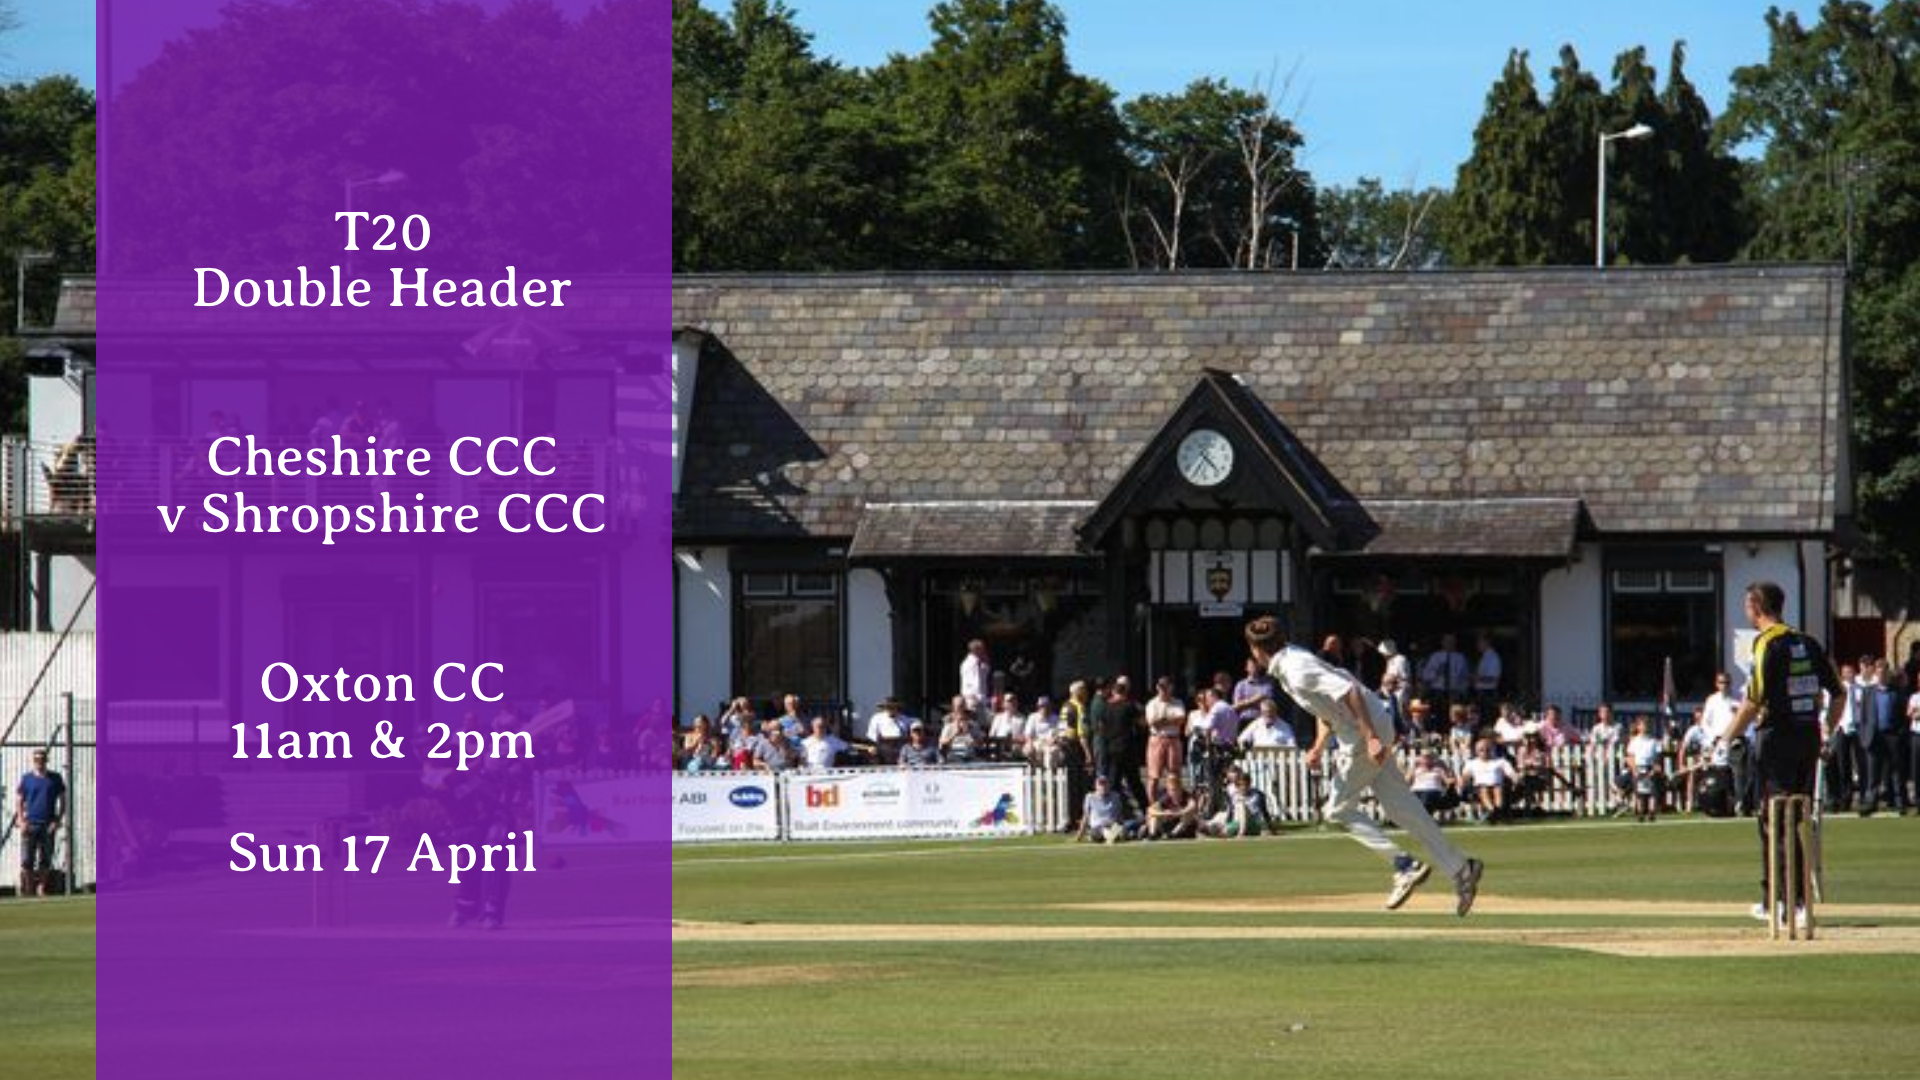 Cheshire CCC v Shropshire CCC at Oxton CC, T20 Double Header, Sunday 17 April 2022